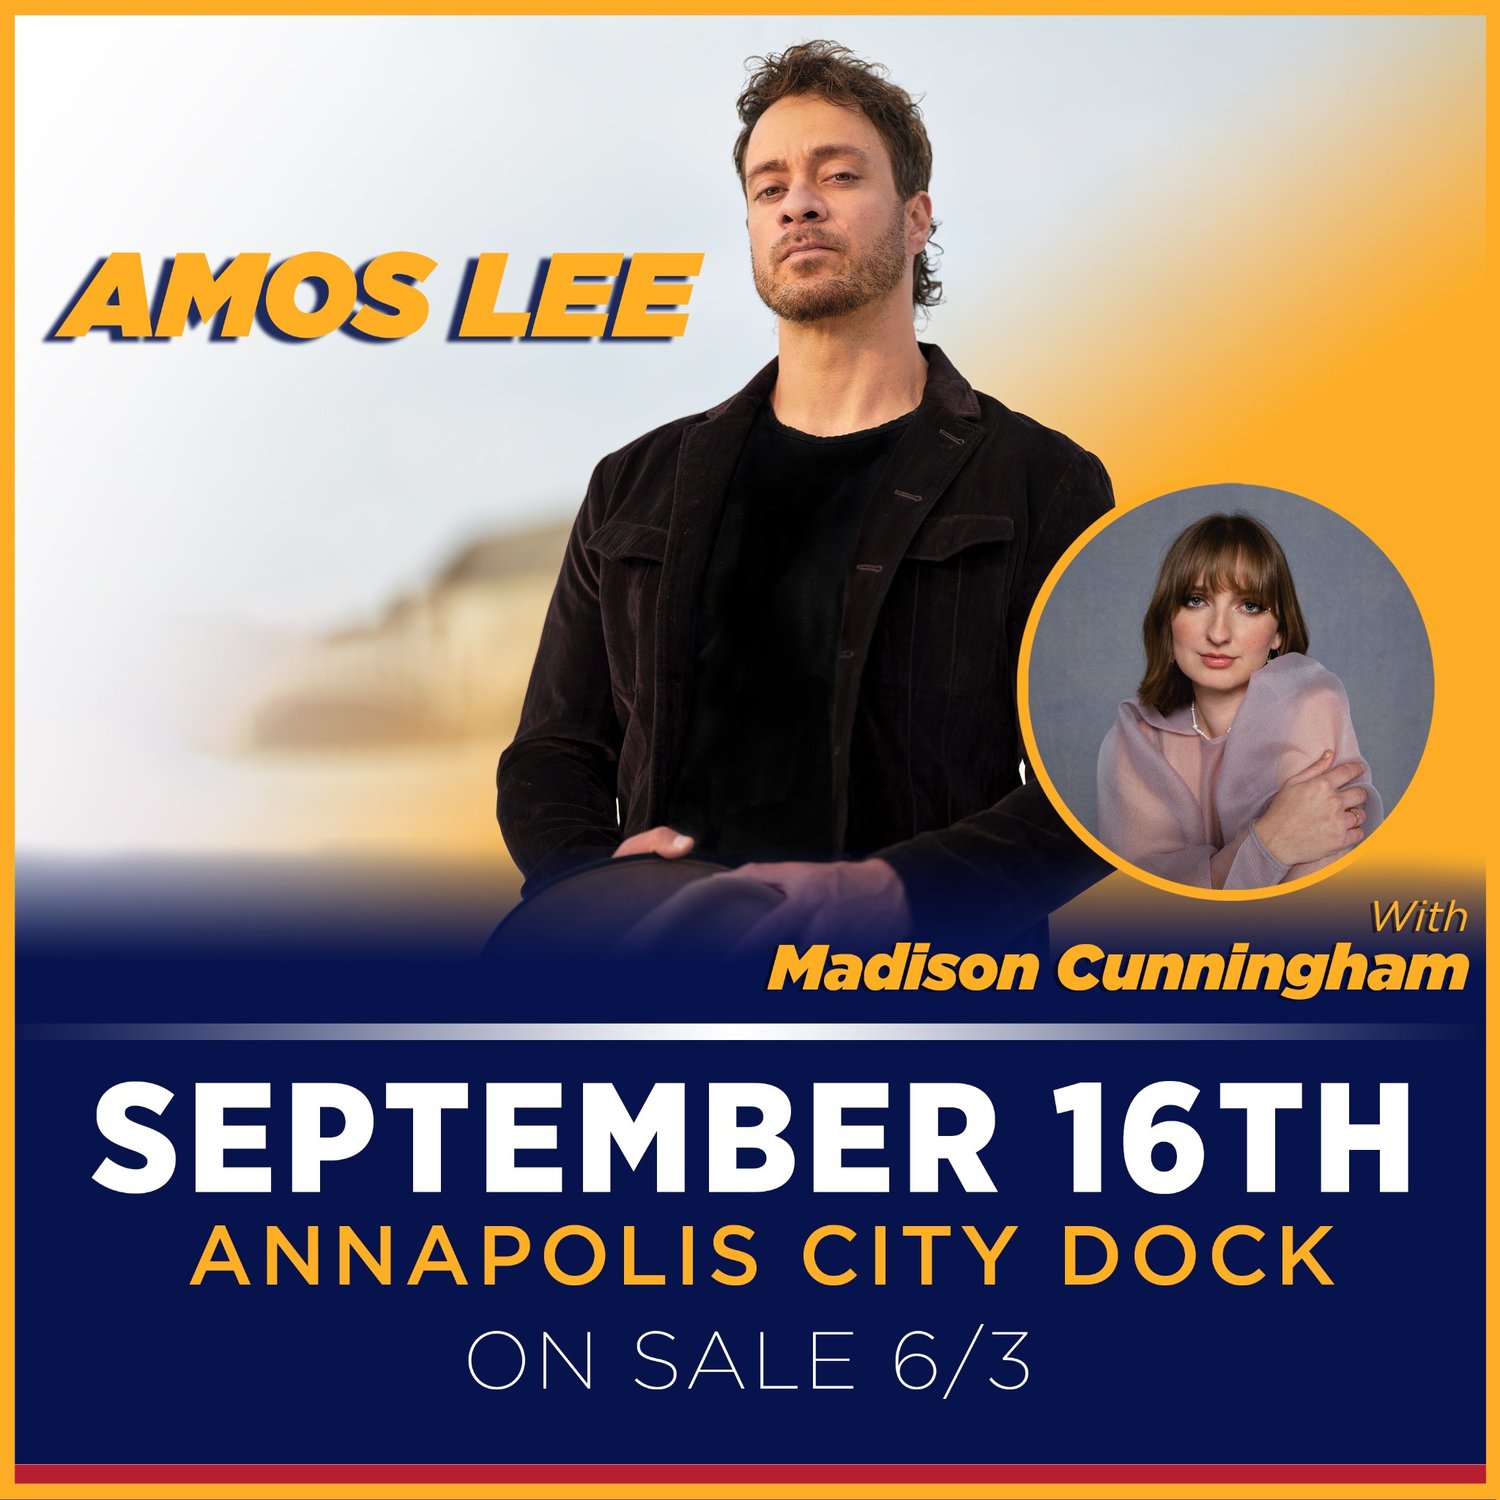 Amos Lee and Madison Cunningham will take the stage at Annapolis City Dock as part of the Annapolis Songwriters Festival.